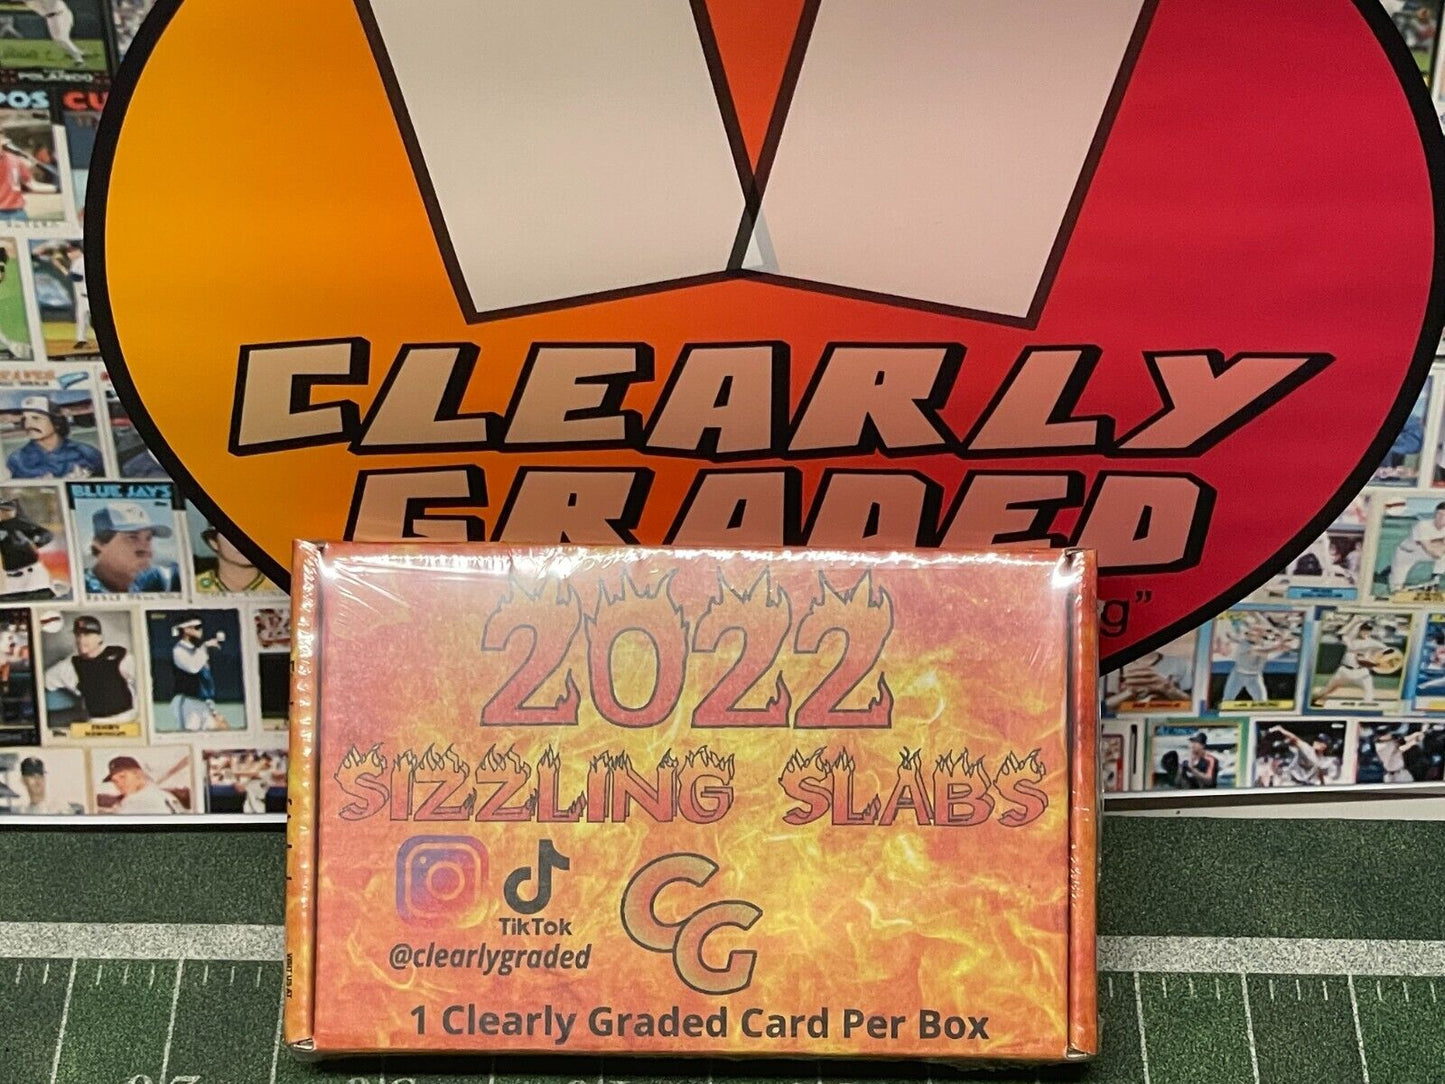 2022 Clearly Graded Sizzling Slabs Football Edition delivers (1) Slabbed Buyback Clearly Graded Card per Box